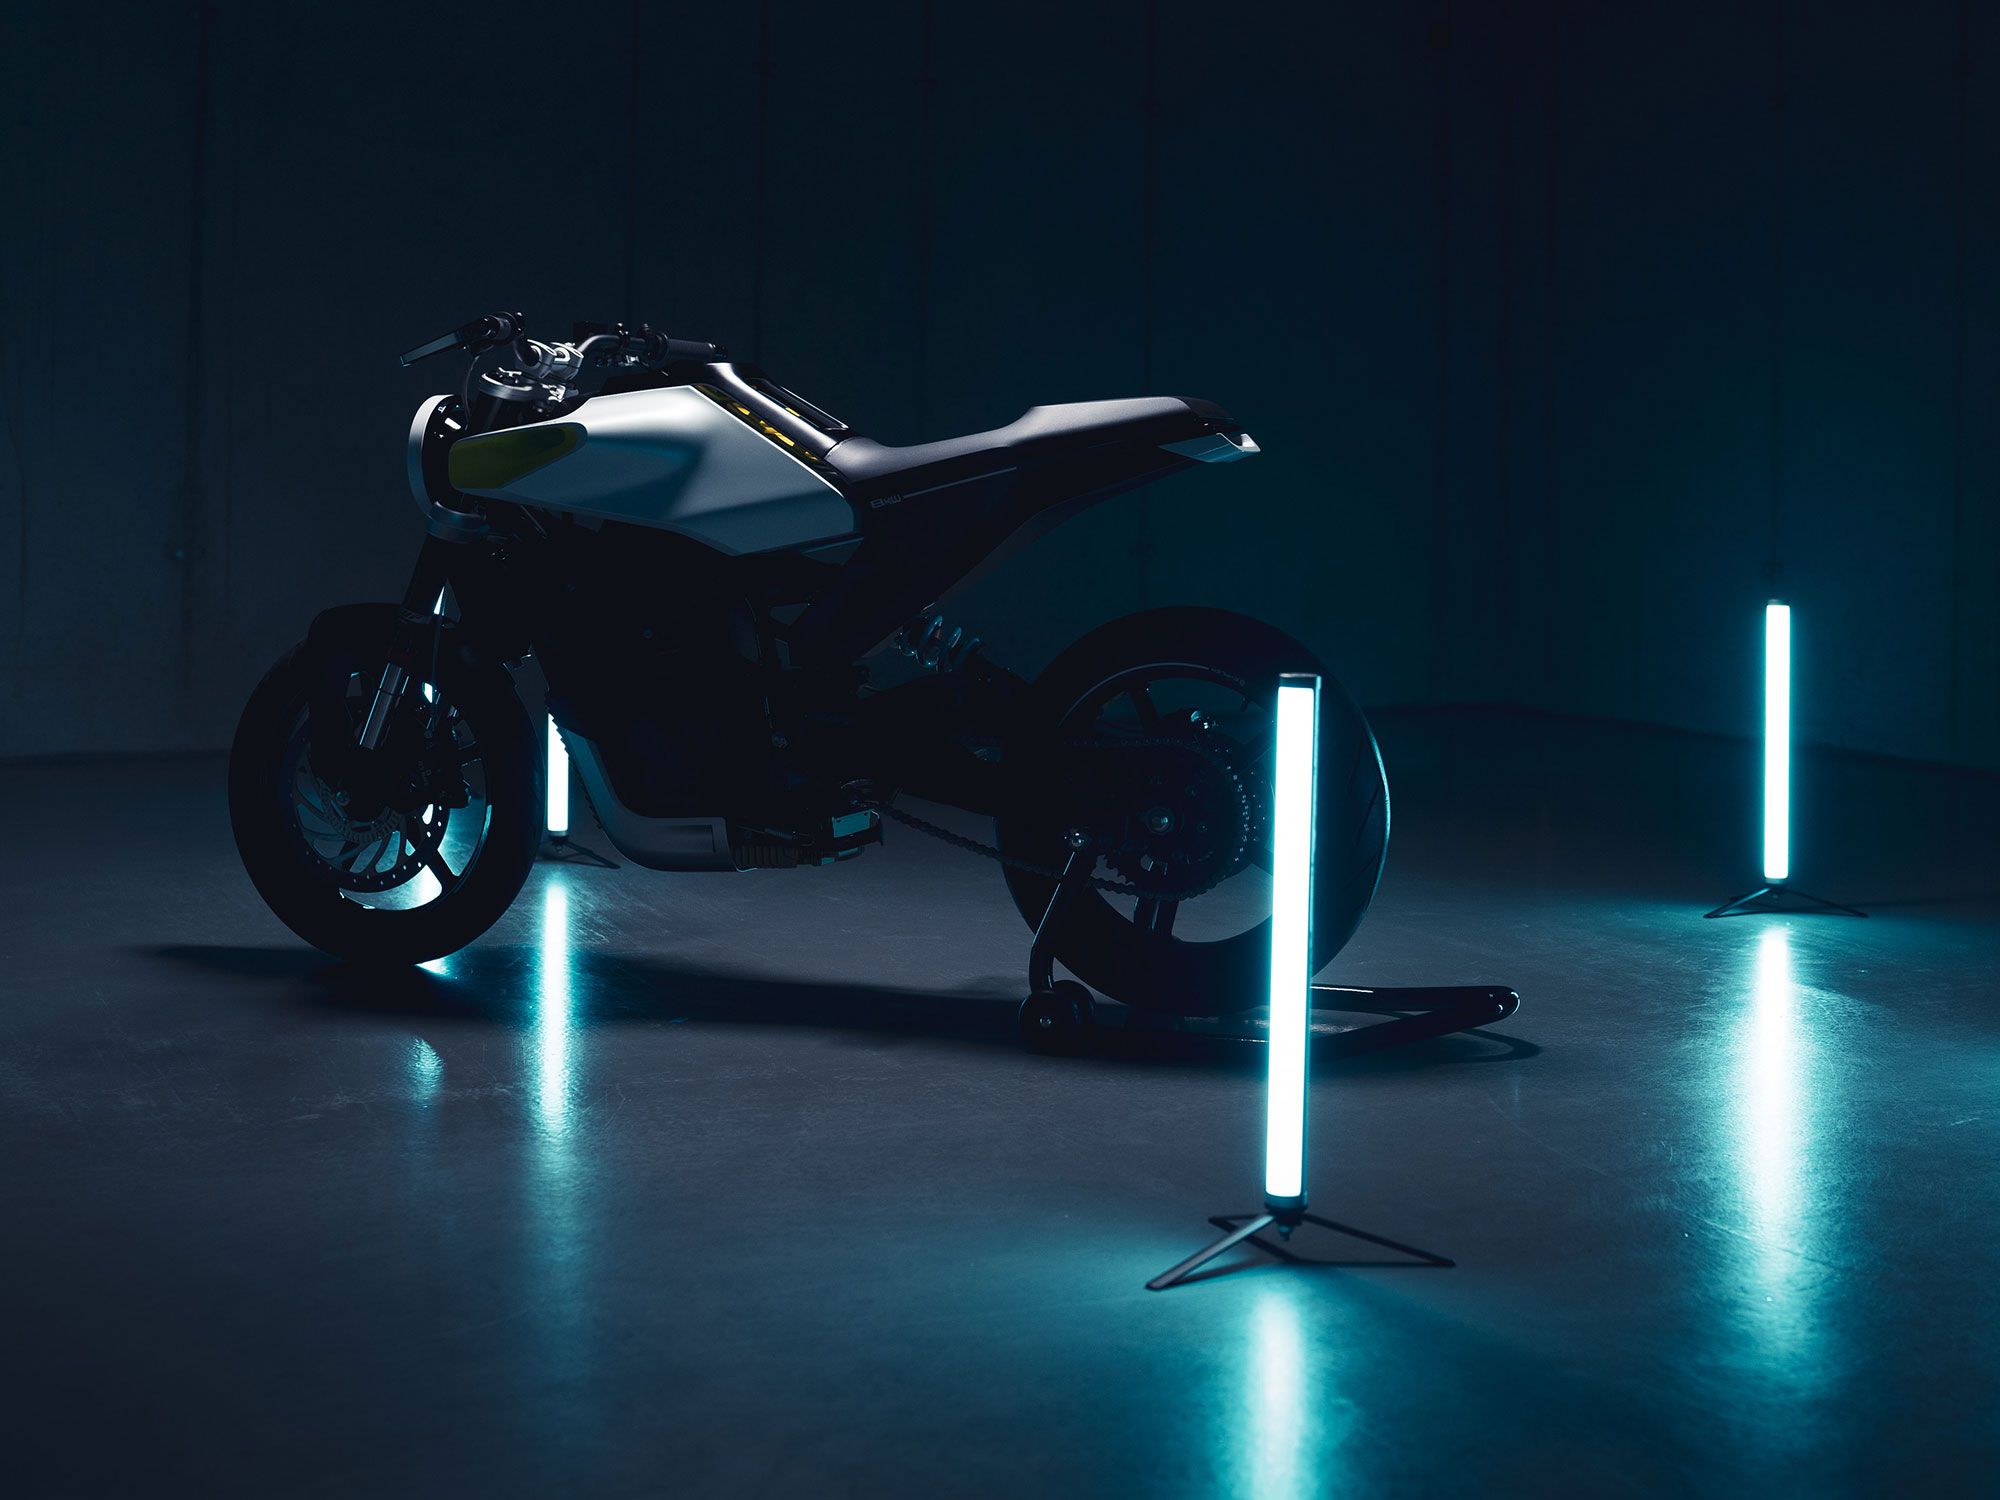 Husqvarna plans to have a family of electric bikes in the future.